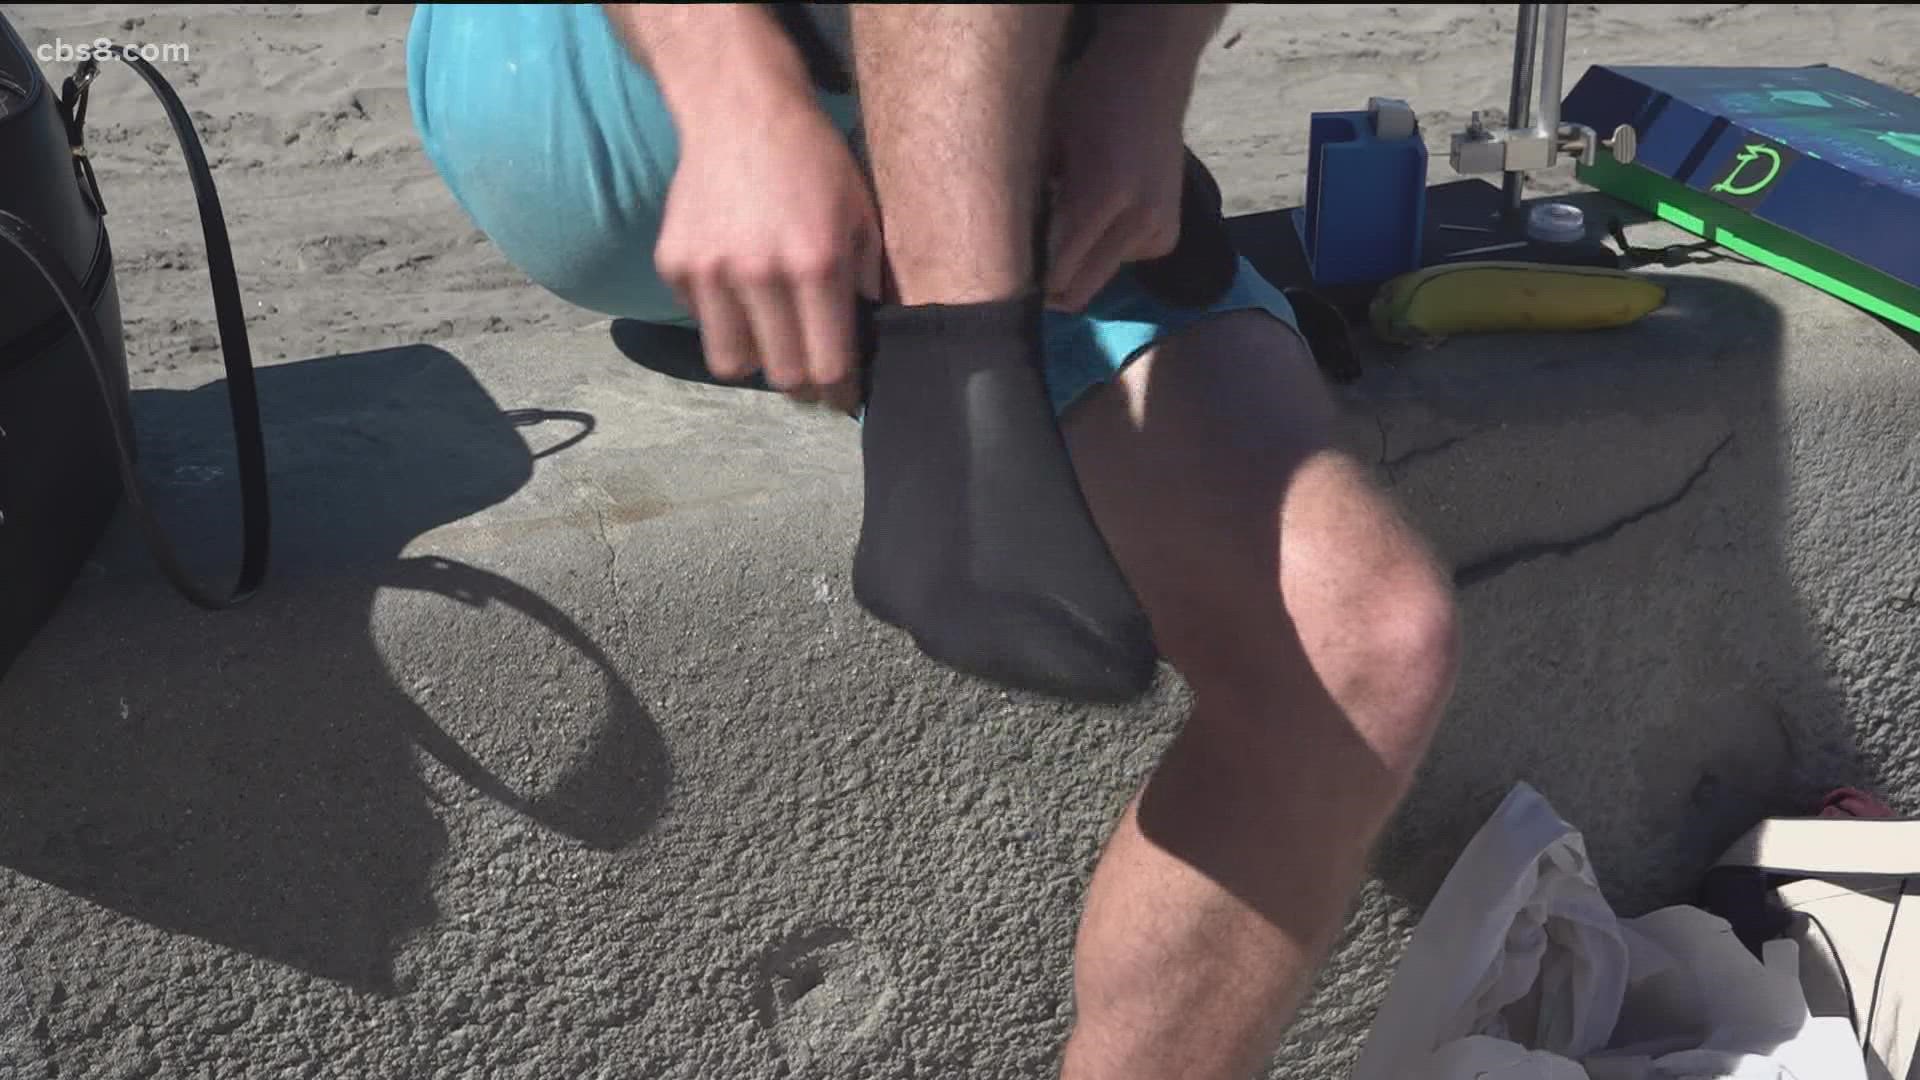 A group of graduates from UC San Diego are working to develop a product that may be useful to have on-hand while at the beach.